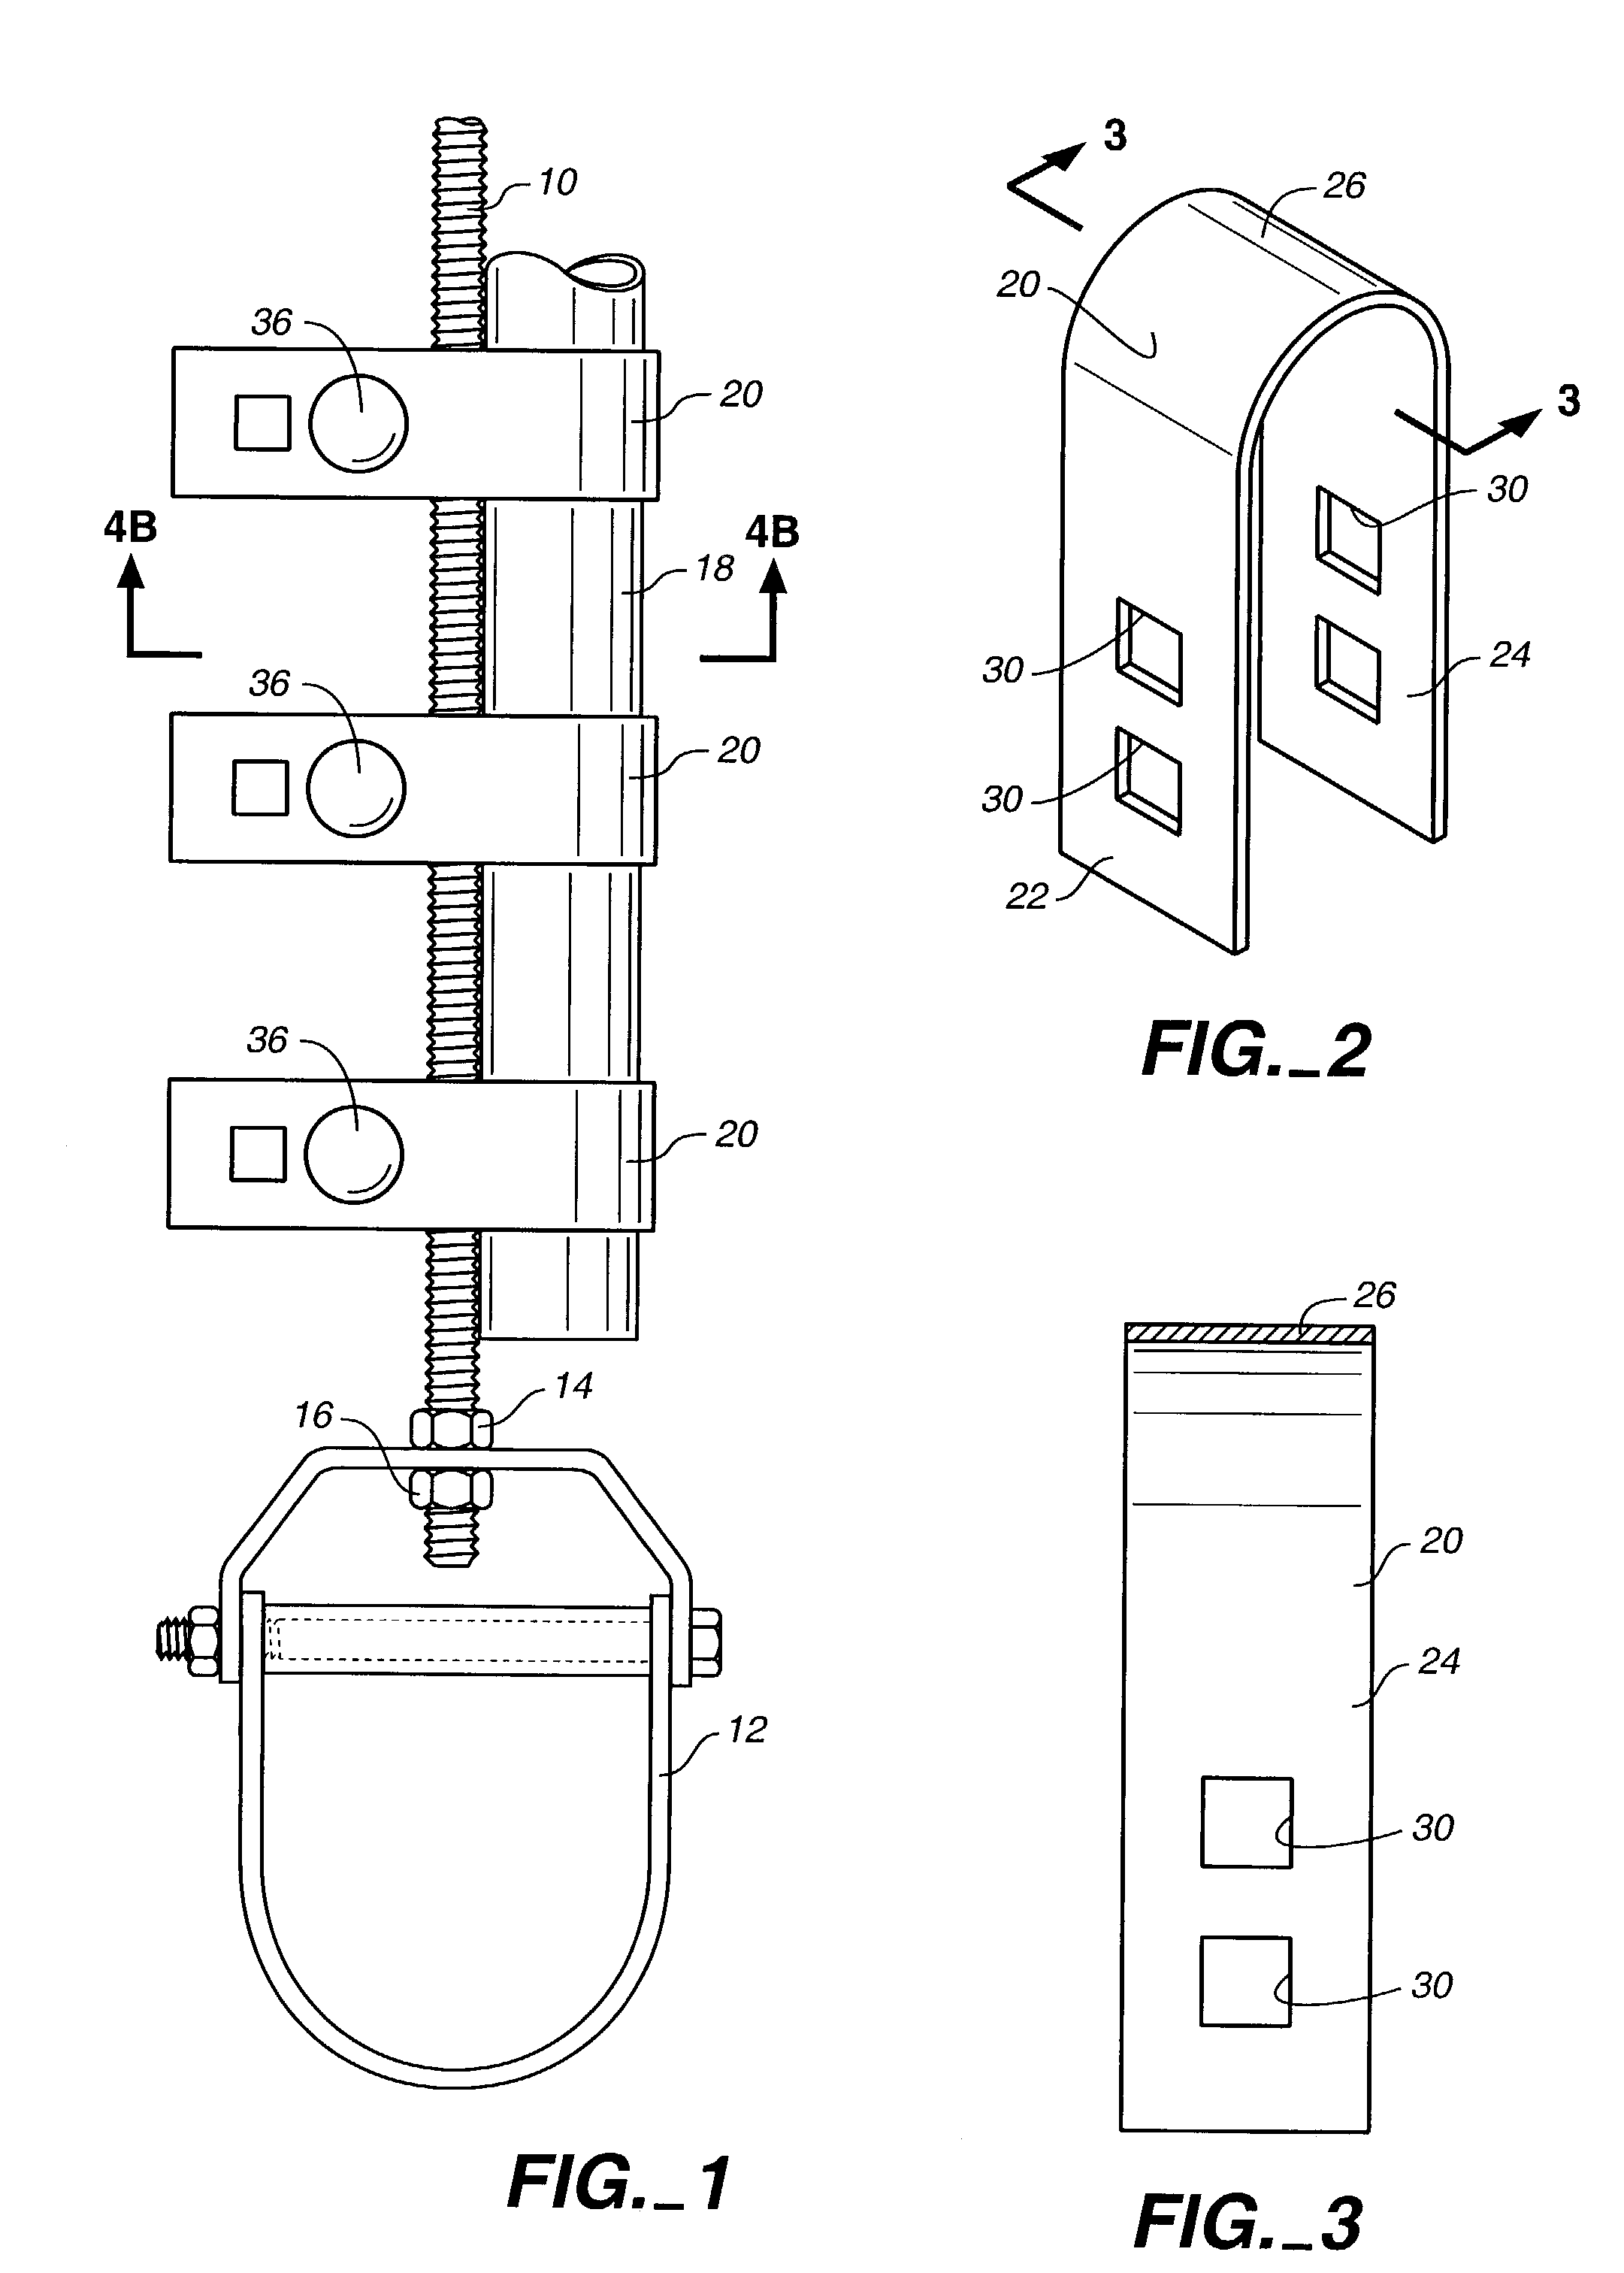 Deformable clamp employed to stiffen hanger rod